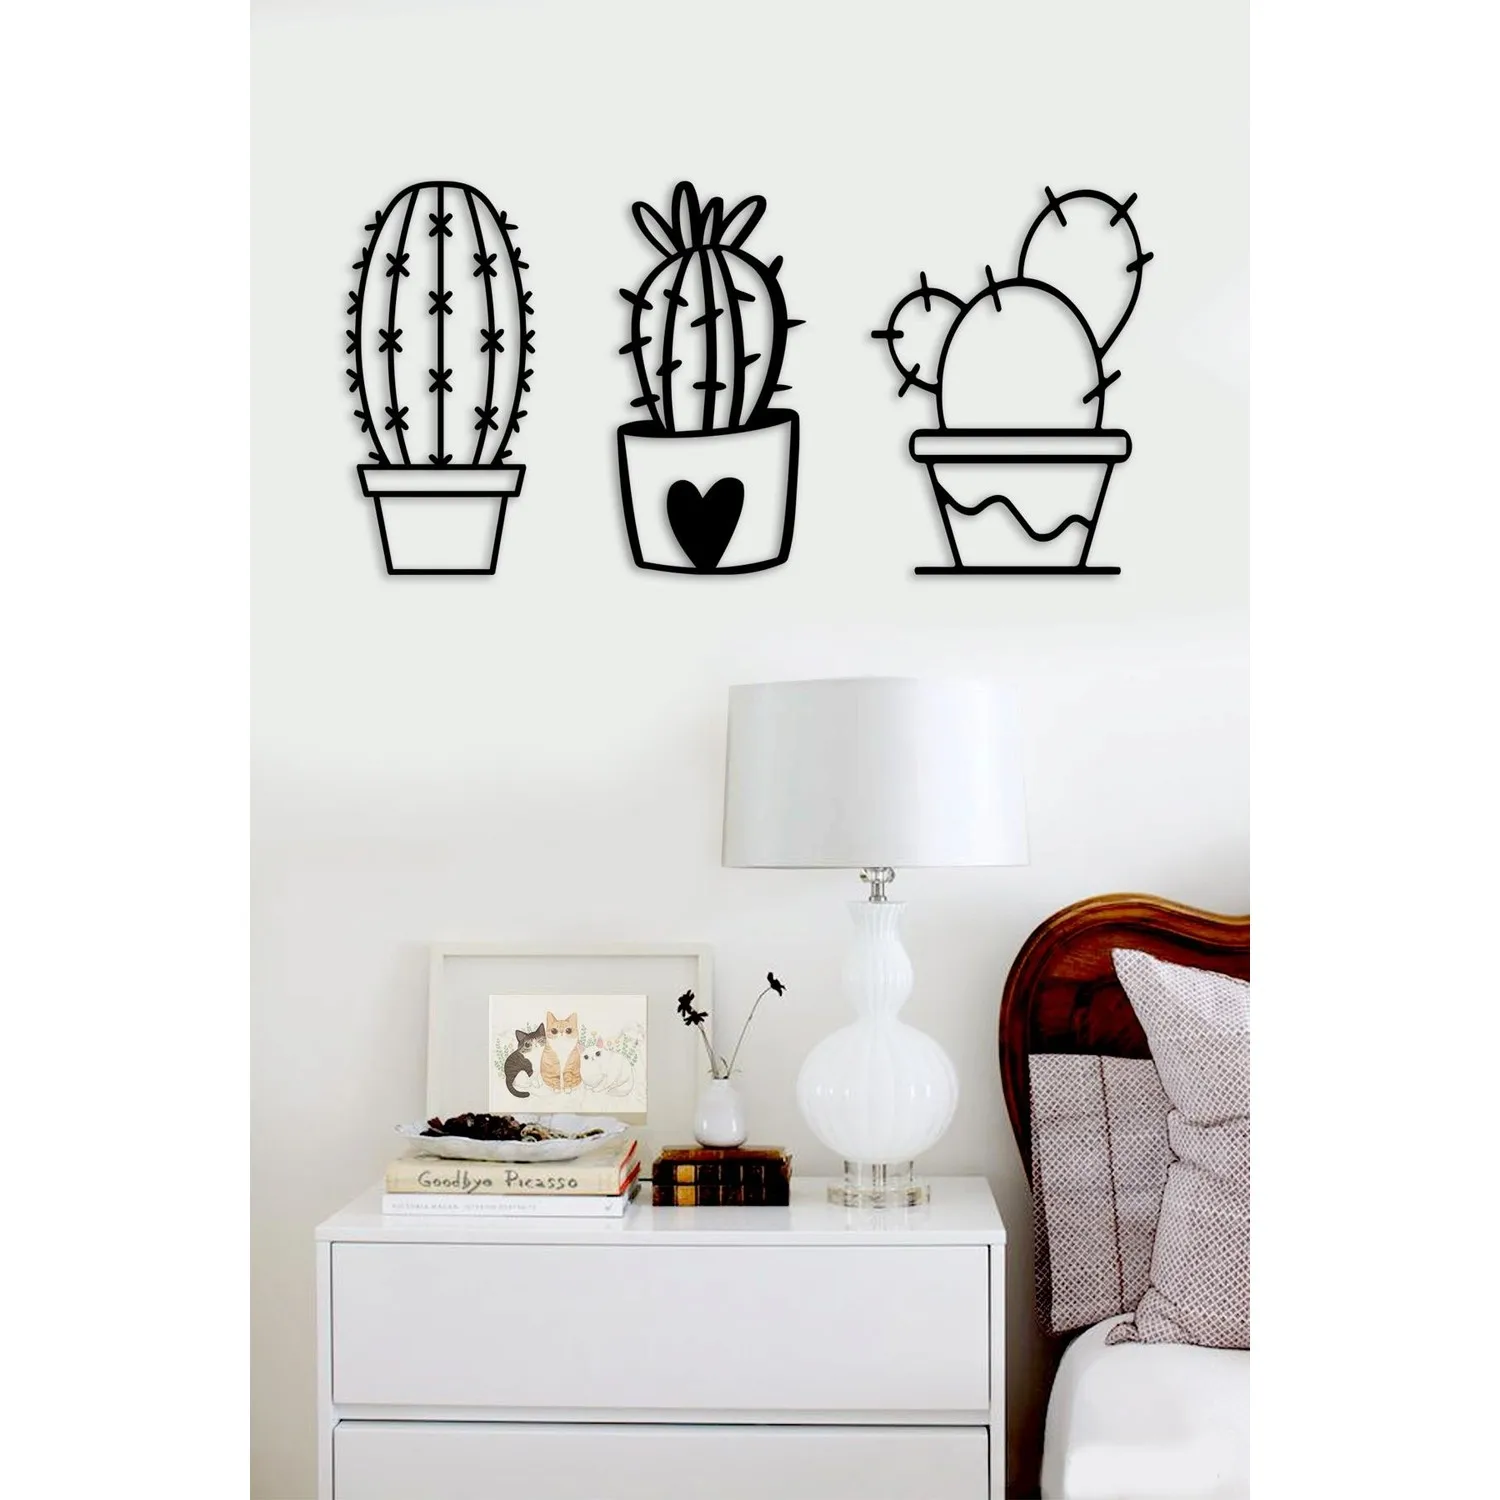 Wooden Wall Art Decor Cactus Flowers Black Natural Home Living Room Bedroom Kitchen Office Decorations Sticker Nature Gifts 2022